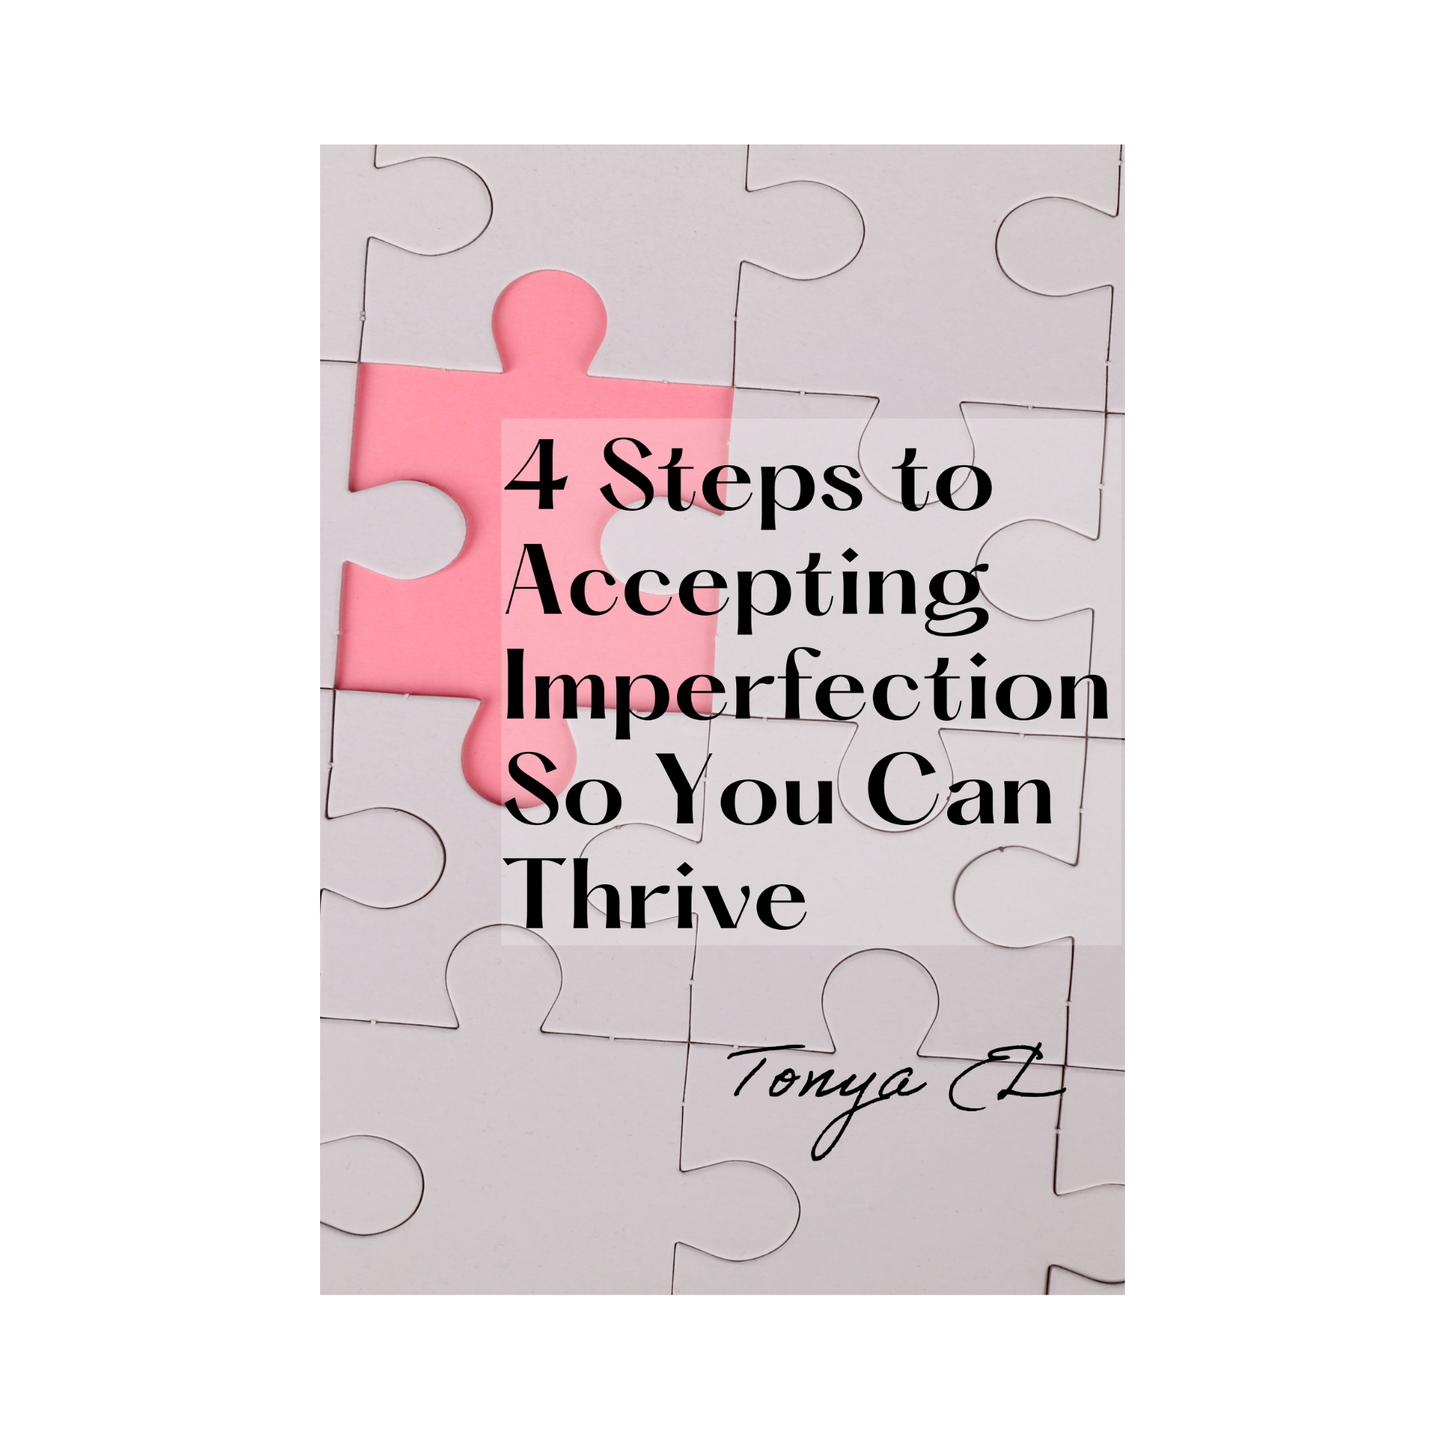 4 Steps to Accepting Imperfection So You Can Thrive